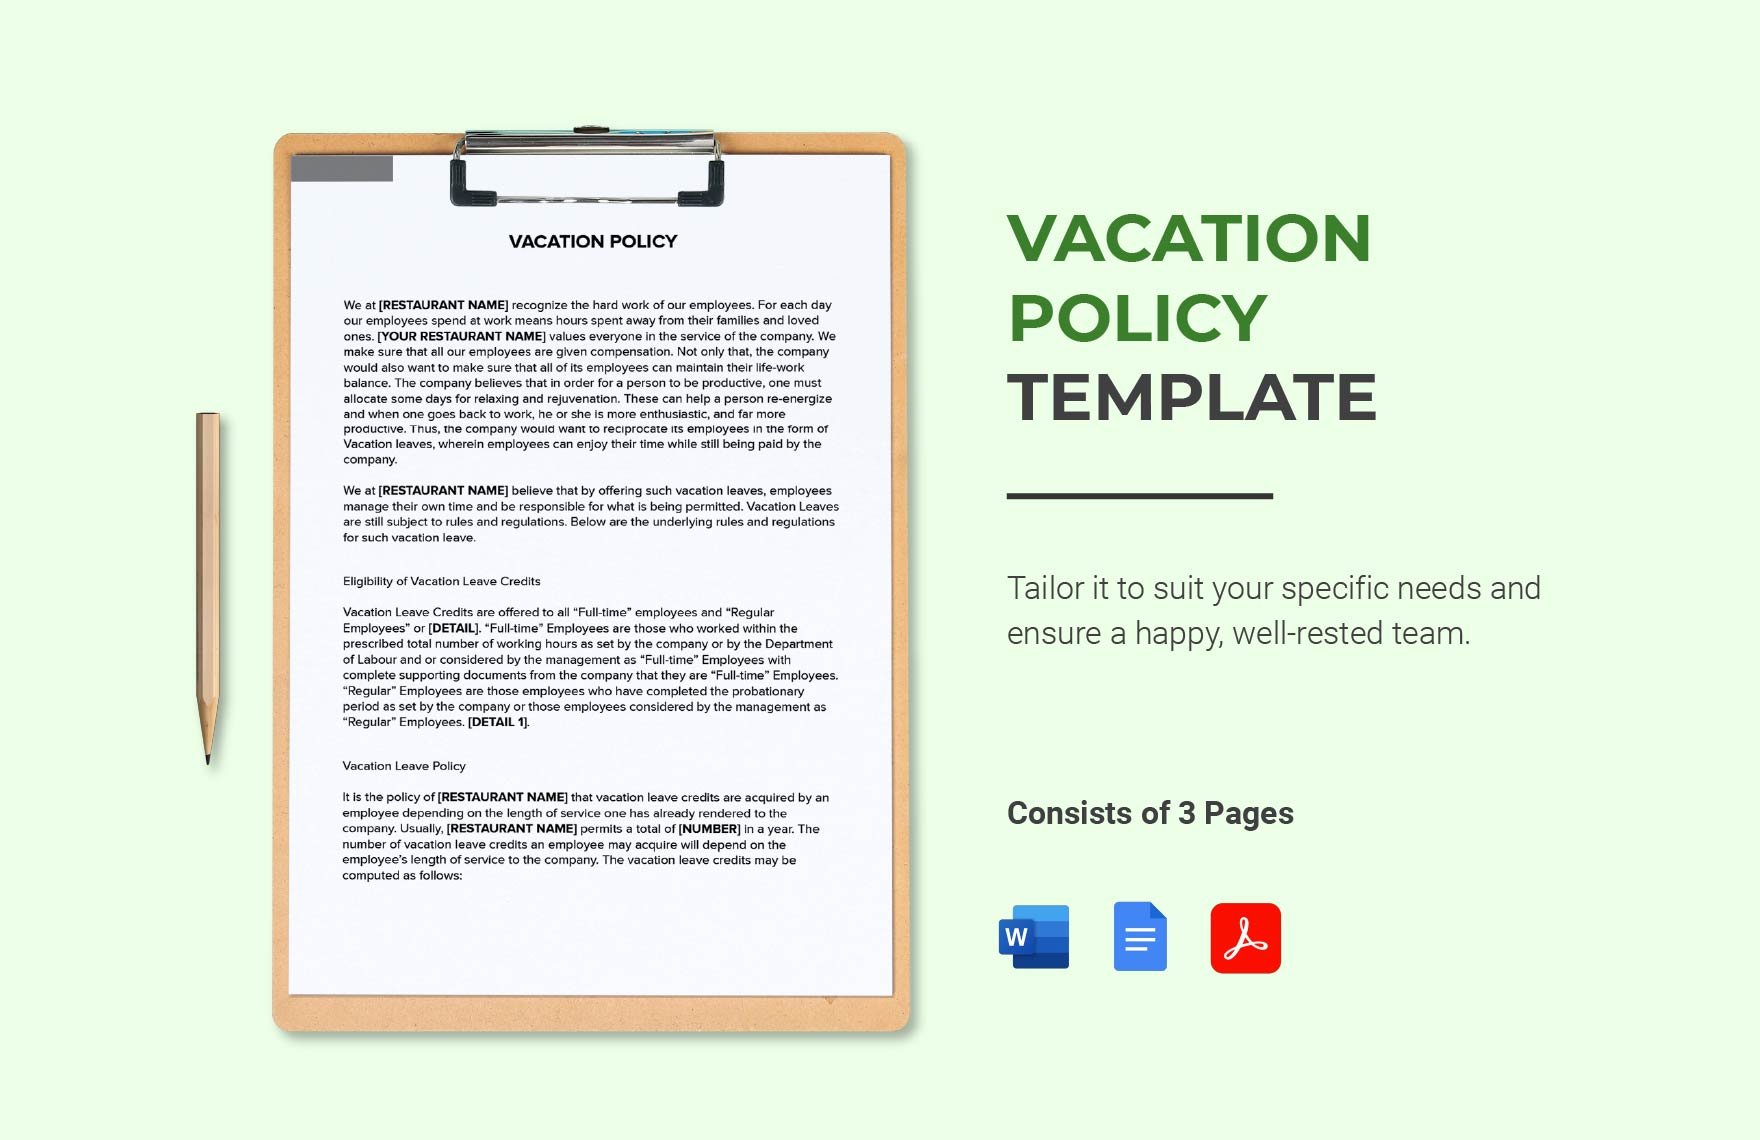 Vacation Policy Template in Word, Google Docs, PDF